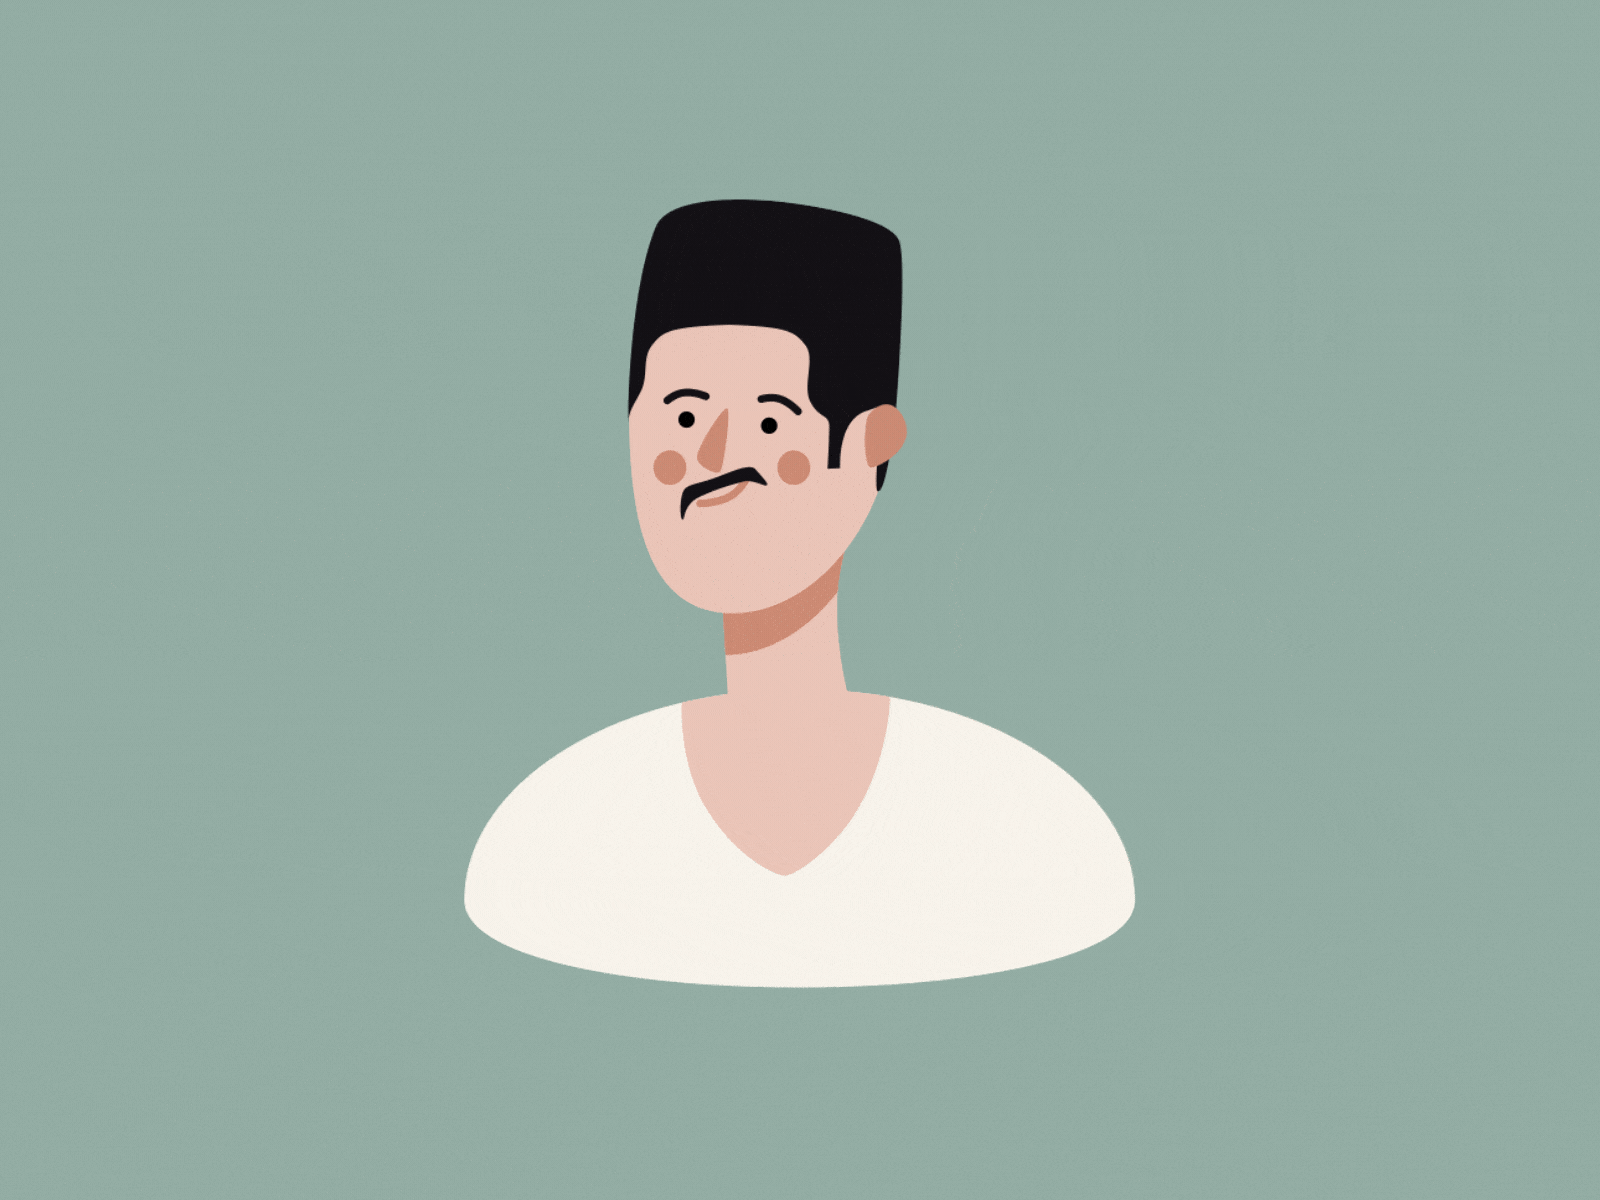 Ricardo | Gif 2d adobe adobe aftereffects adobe illustrator animation character characterdesign colorful cute dribbble dribbble best shot flat gif illustration mustache vector